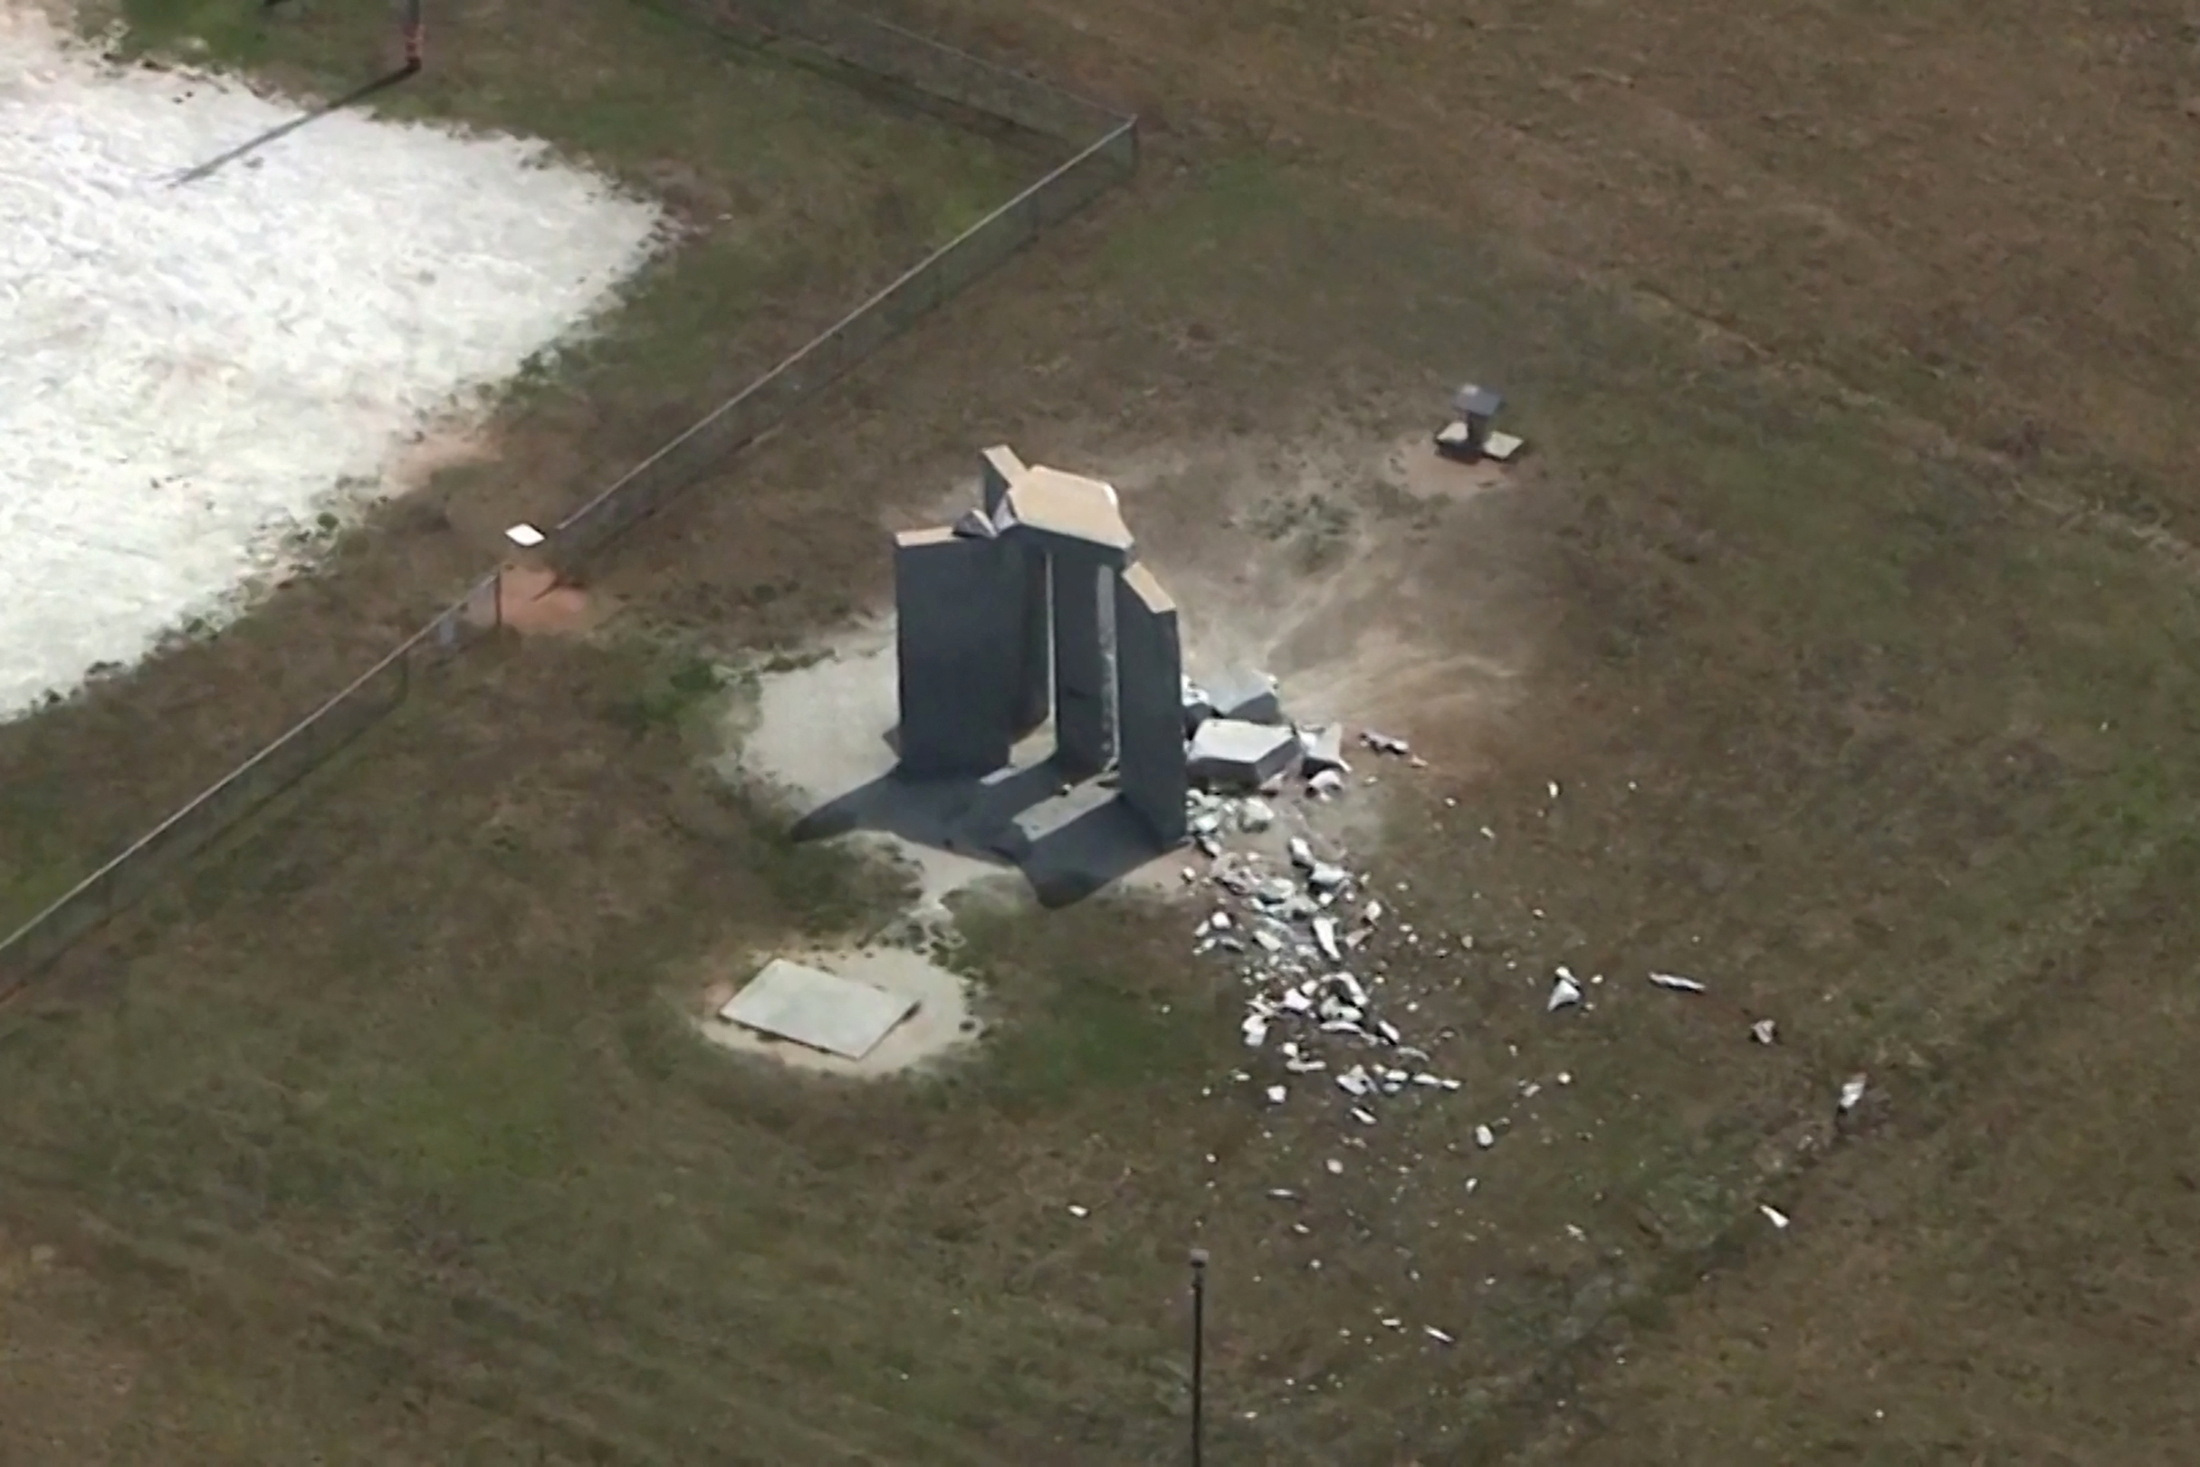 Rubble is cast around the Georgia Guidestones after an explosion in Elberton